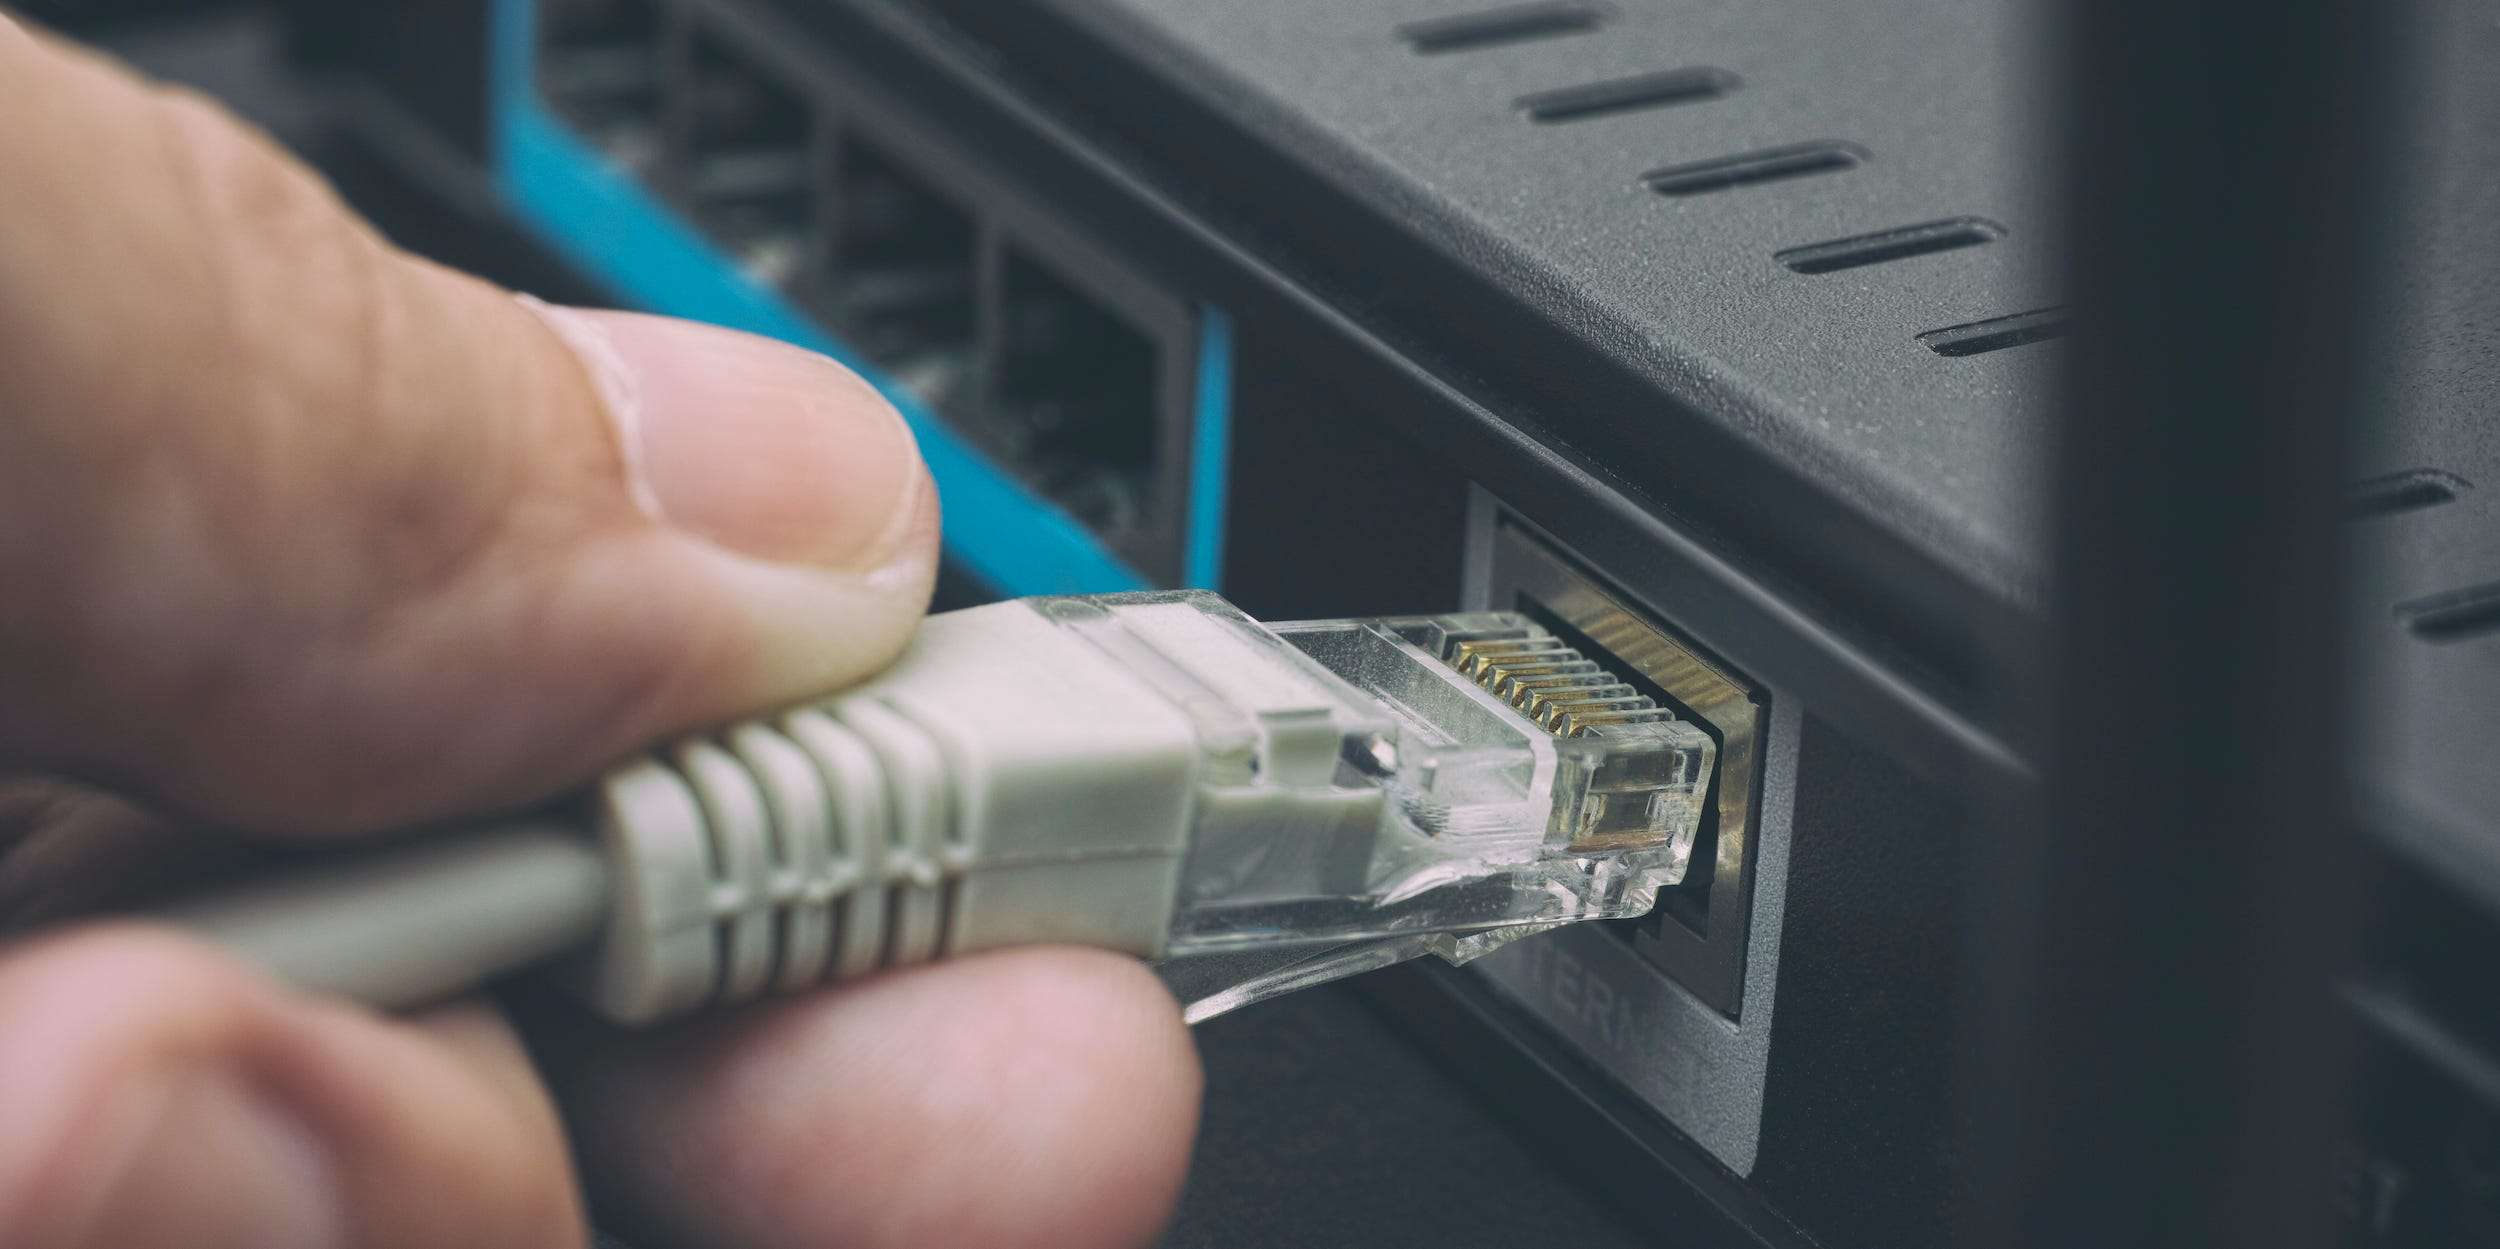 What is an Ethernet cable? Here’s how to connect to the internet without Wi-Fi and get a speedier connection